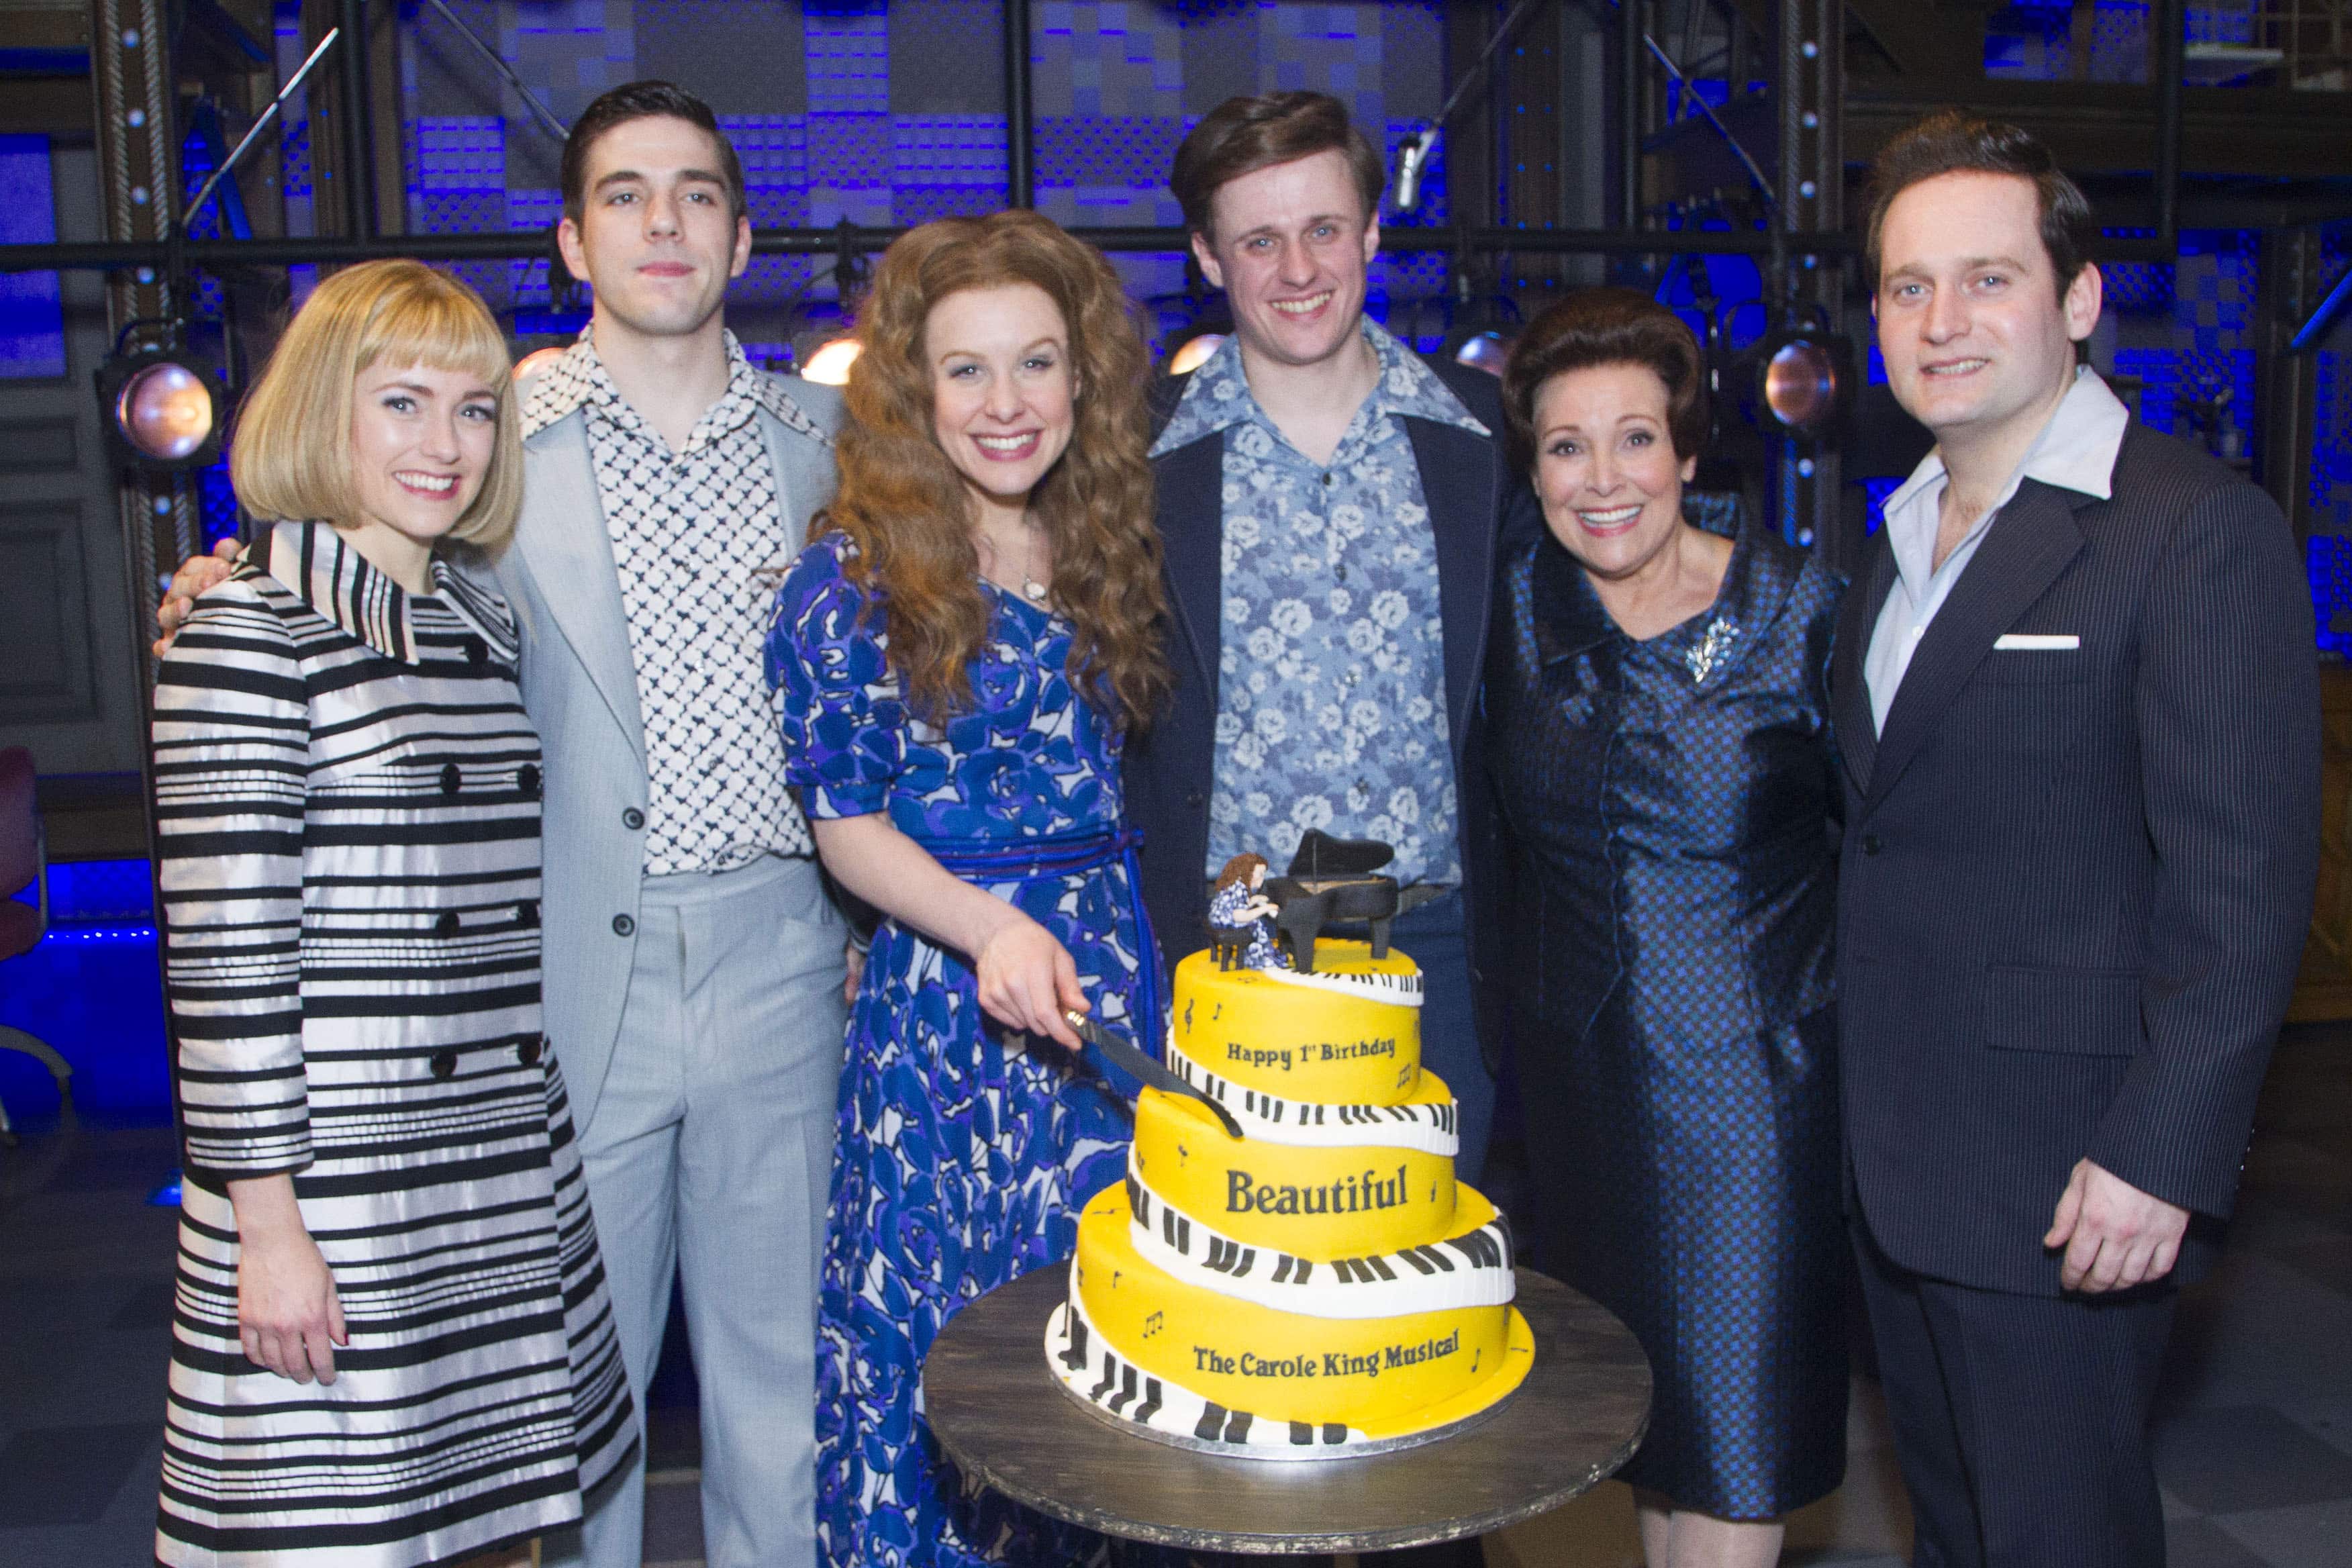 Beautiful - The Carole King Musical celebrate the show's 1st birthday in London